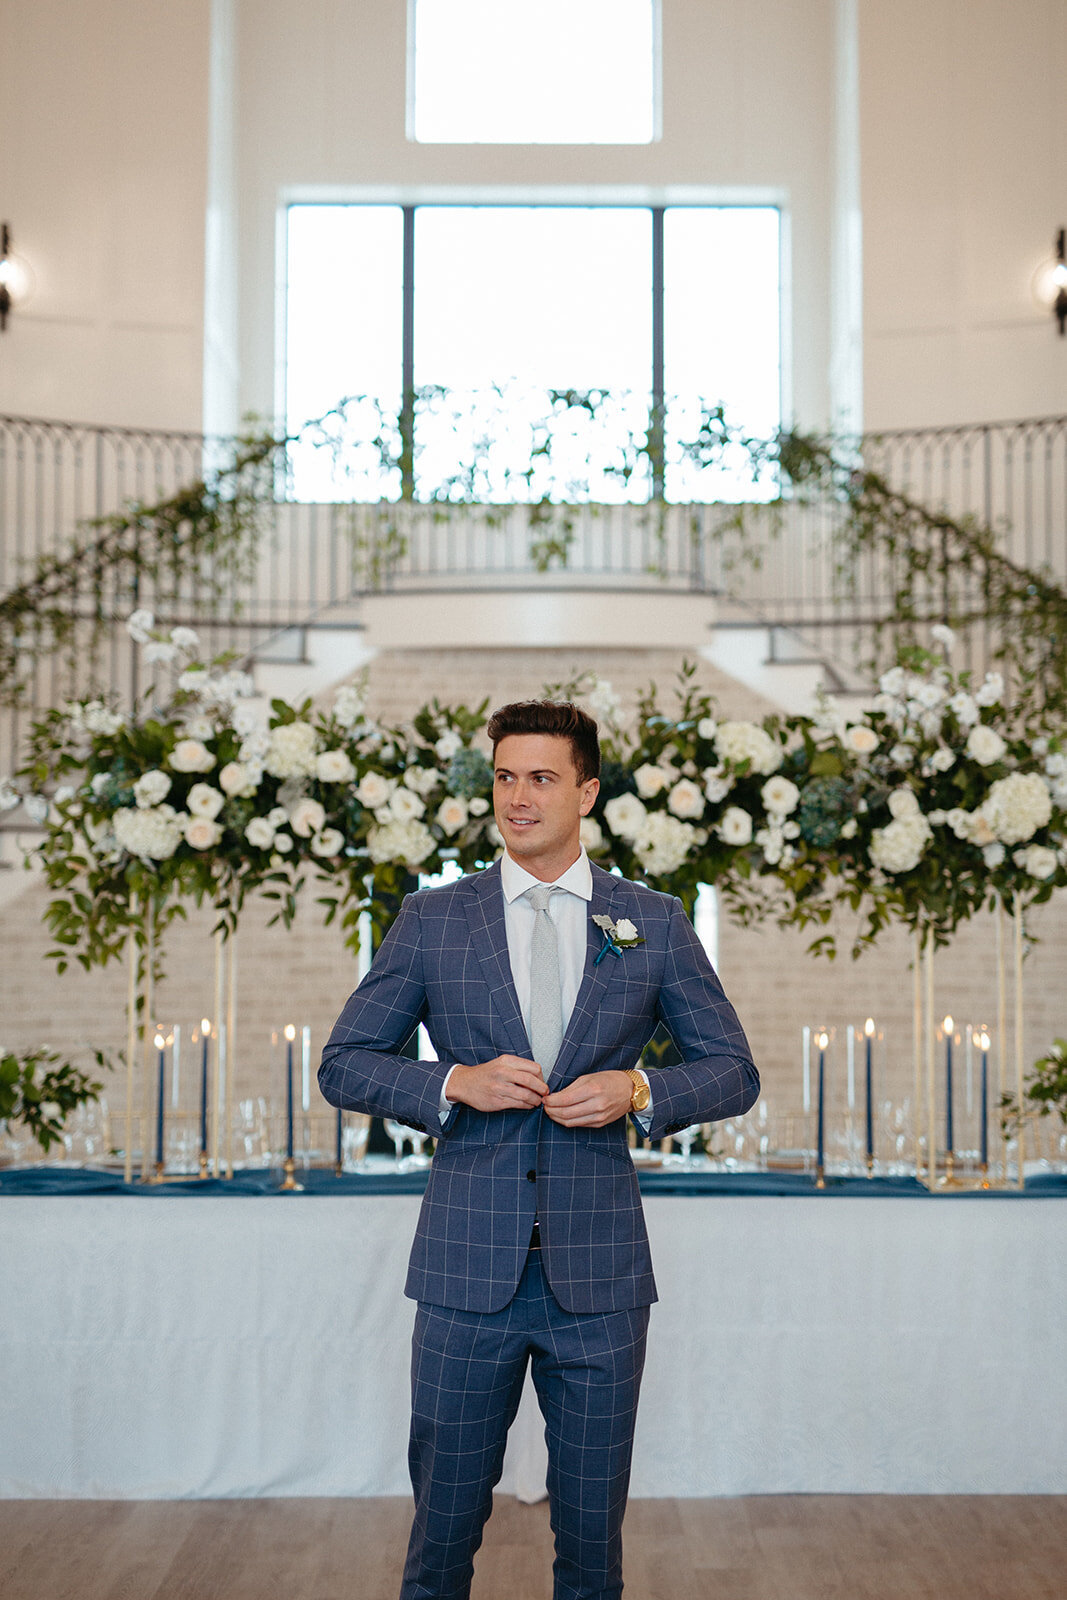 Groom in a blue suit buttons his jacket in front of a long rectangular table with lit candles and white florals.